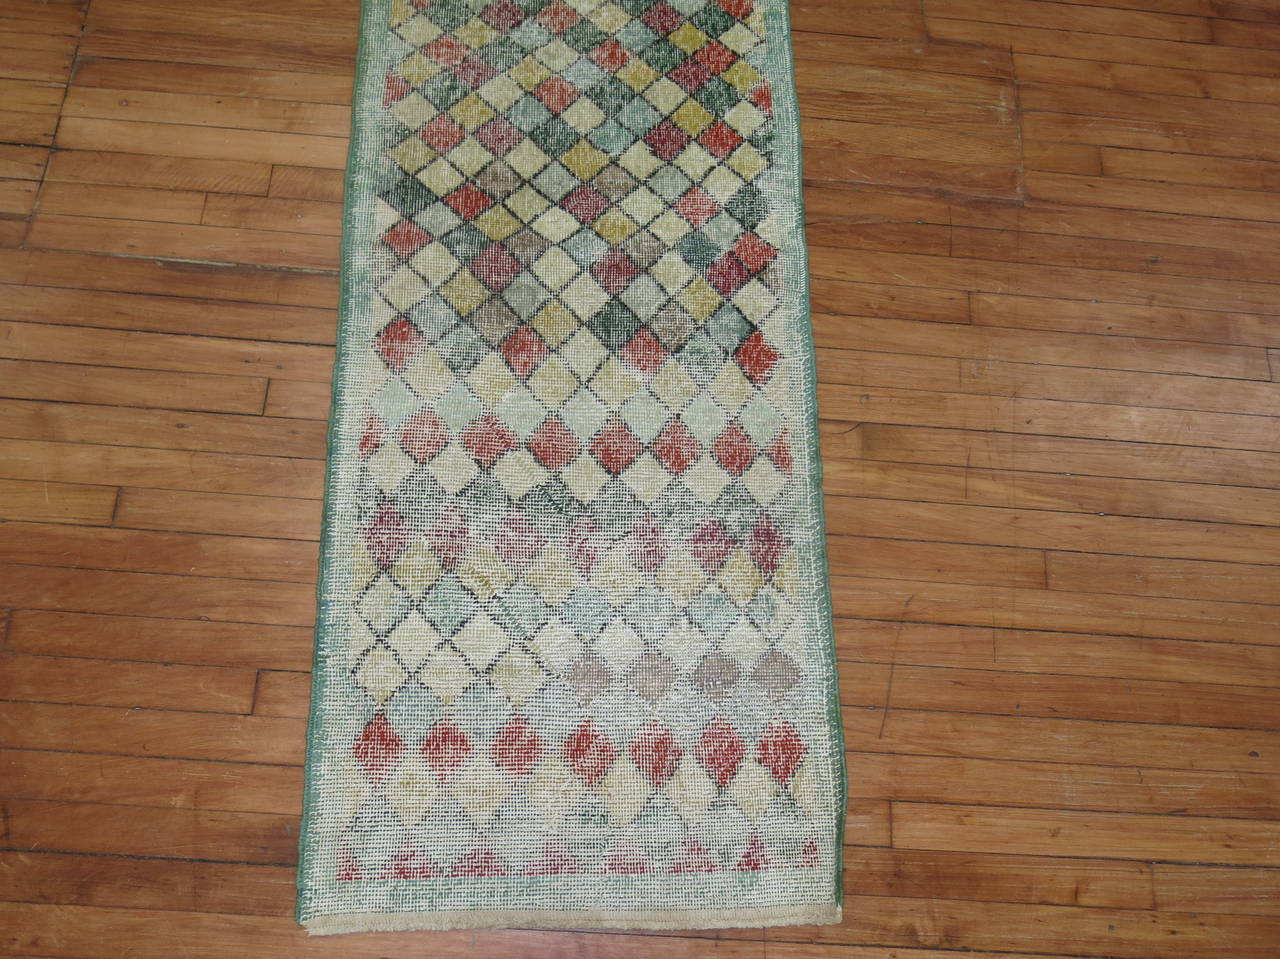 A distressed Turkish runner with an all-over diamond motif.

Measures: 2'2